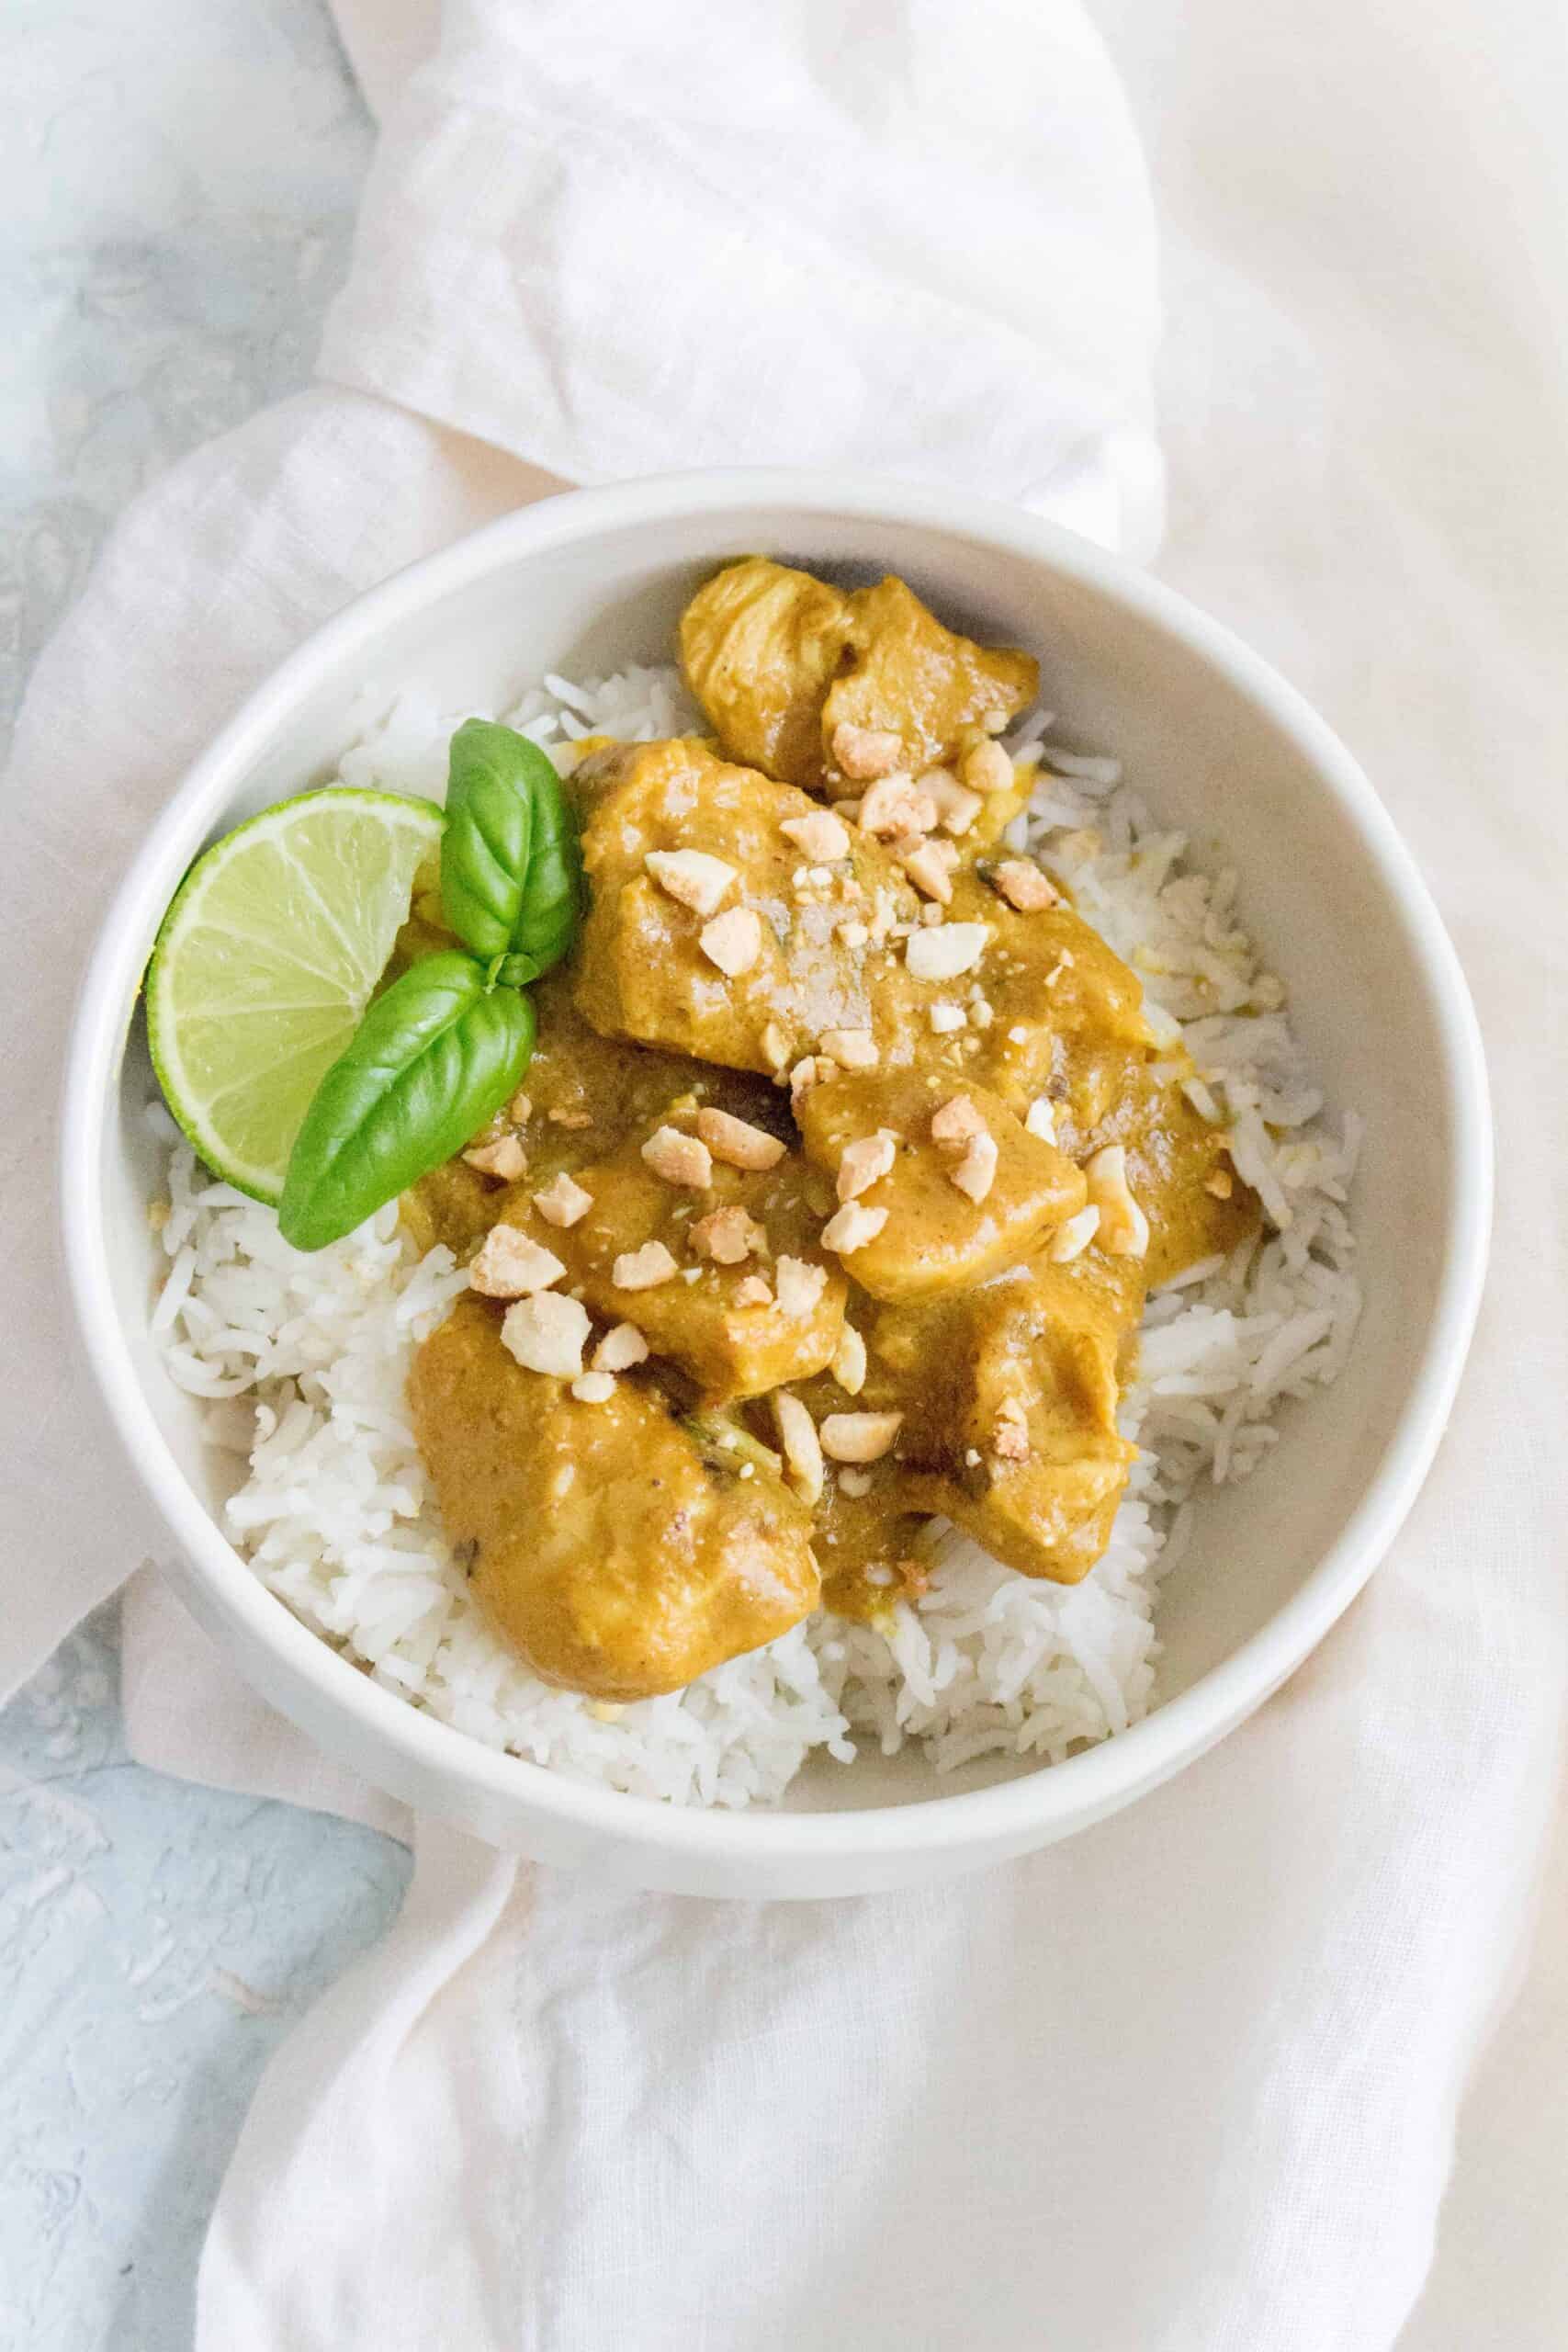 Creamy, aromatic, and easy to make, this Instant Pot Chicken Peanut Satay is going to become a staple in your meal plans!